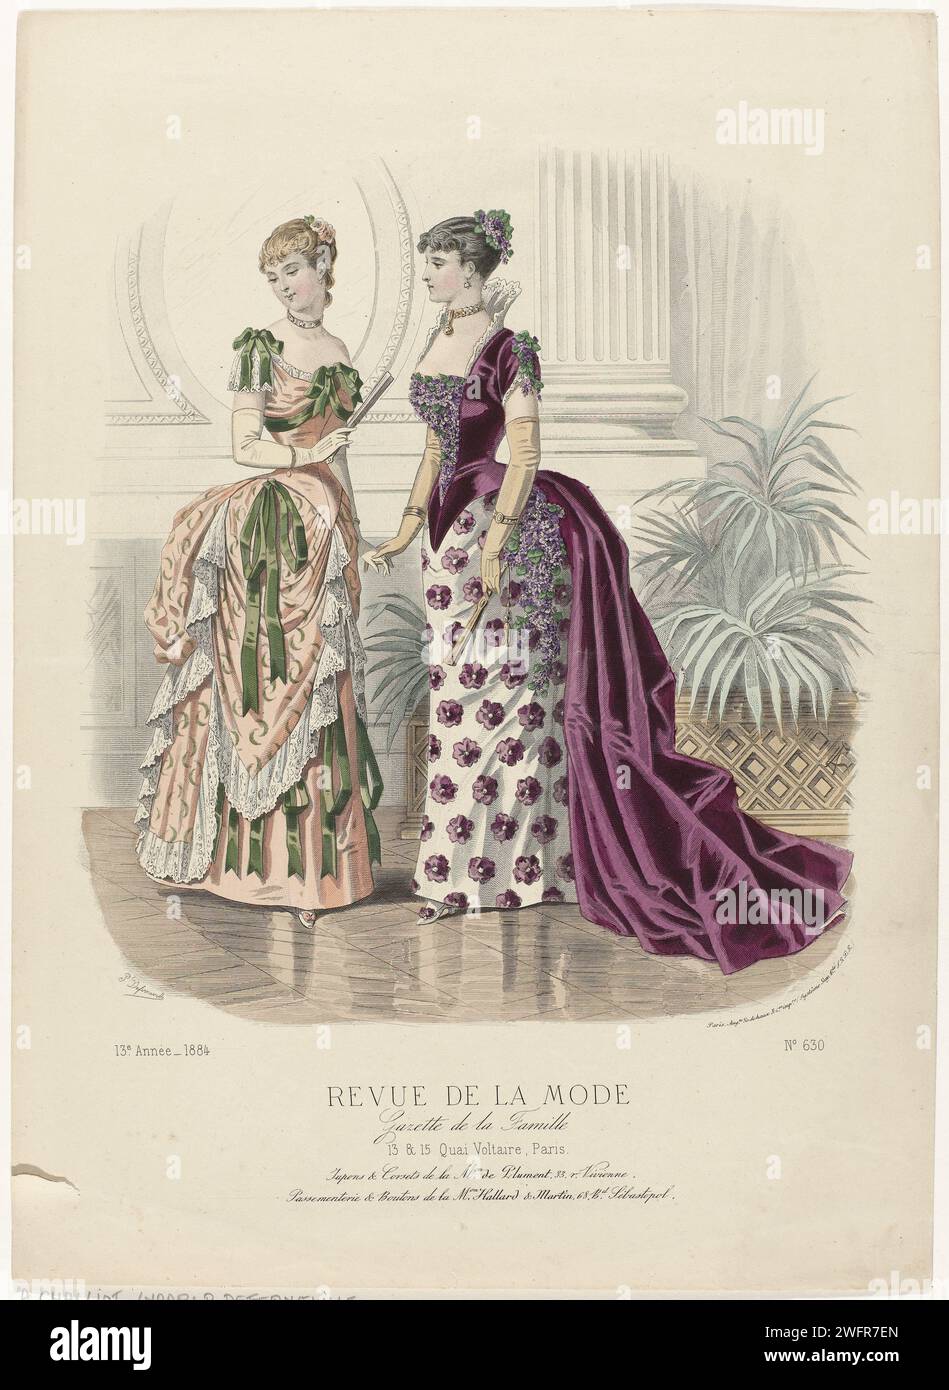 Fashion review, family gazette, January 24, 1884, 13th year, no. 630: petticoats & corsets (...), A. Chaillot, after P. Deferneville, 1884  Two women in an interior. Left: dress of plain light pink silk and 'brocatelle' decorated with white lace and green ribbons. Long gloves of light suede. Right: dress of white brochure satin and wine red (claret) velvet or satin decorated with purple flowers. Under the performance some lines of advertising text for different products. Print from the fashion magazine Revue de La Mode (1872-1913). Detailed description of the clothing on page 27 'planche color Stock Photo